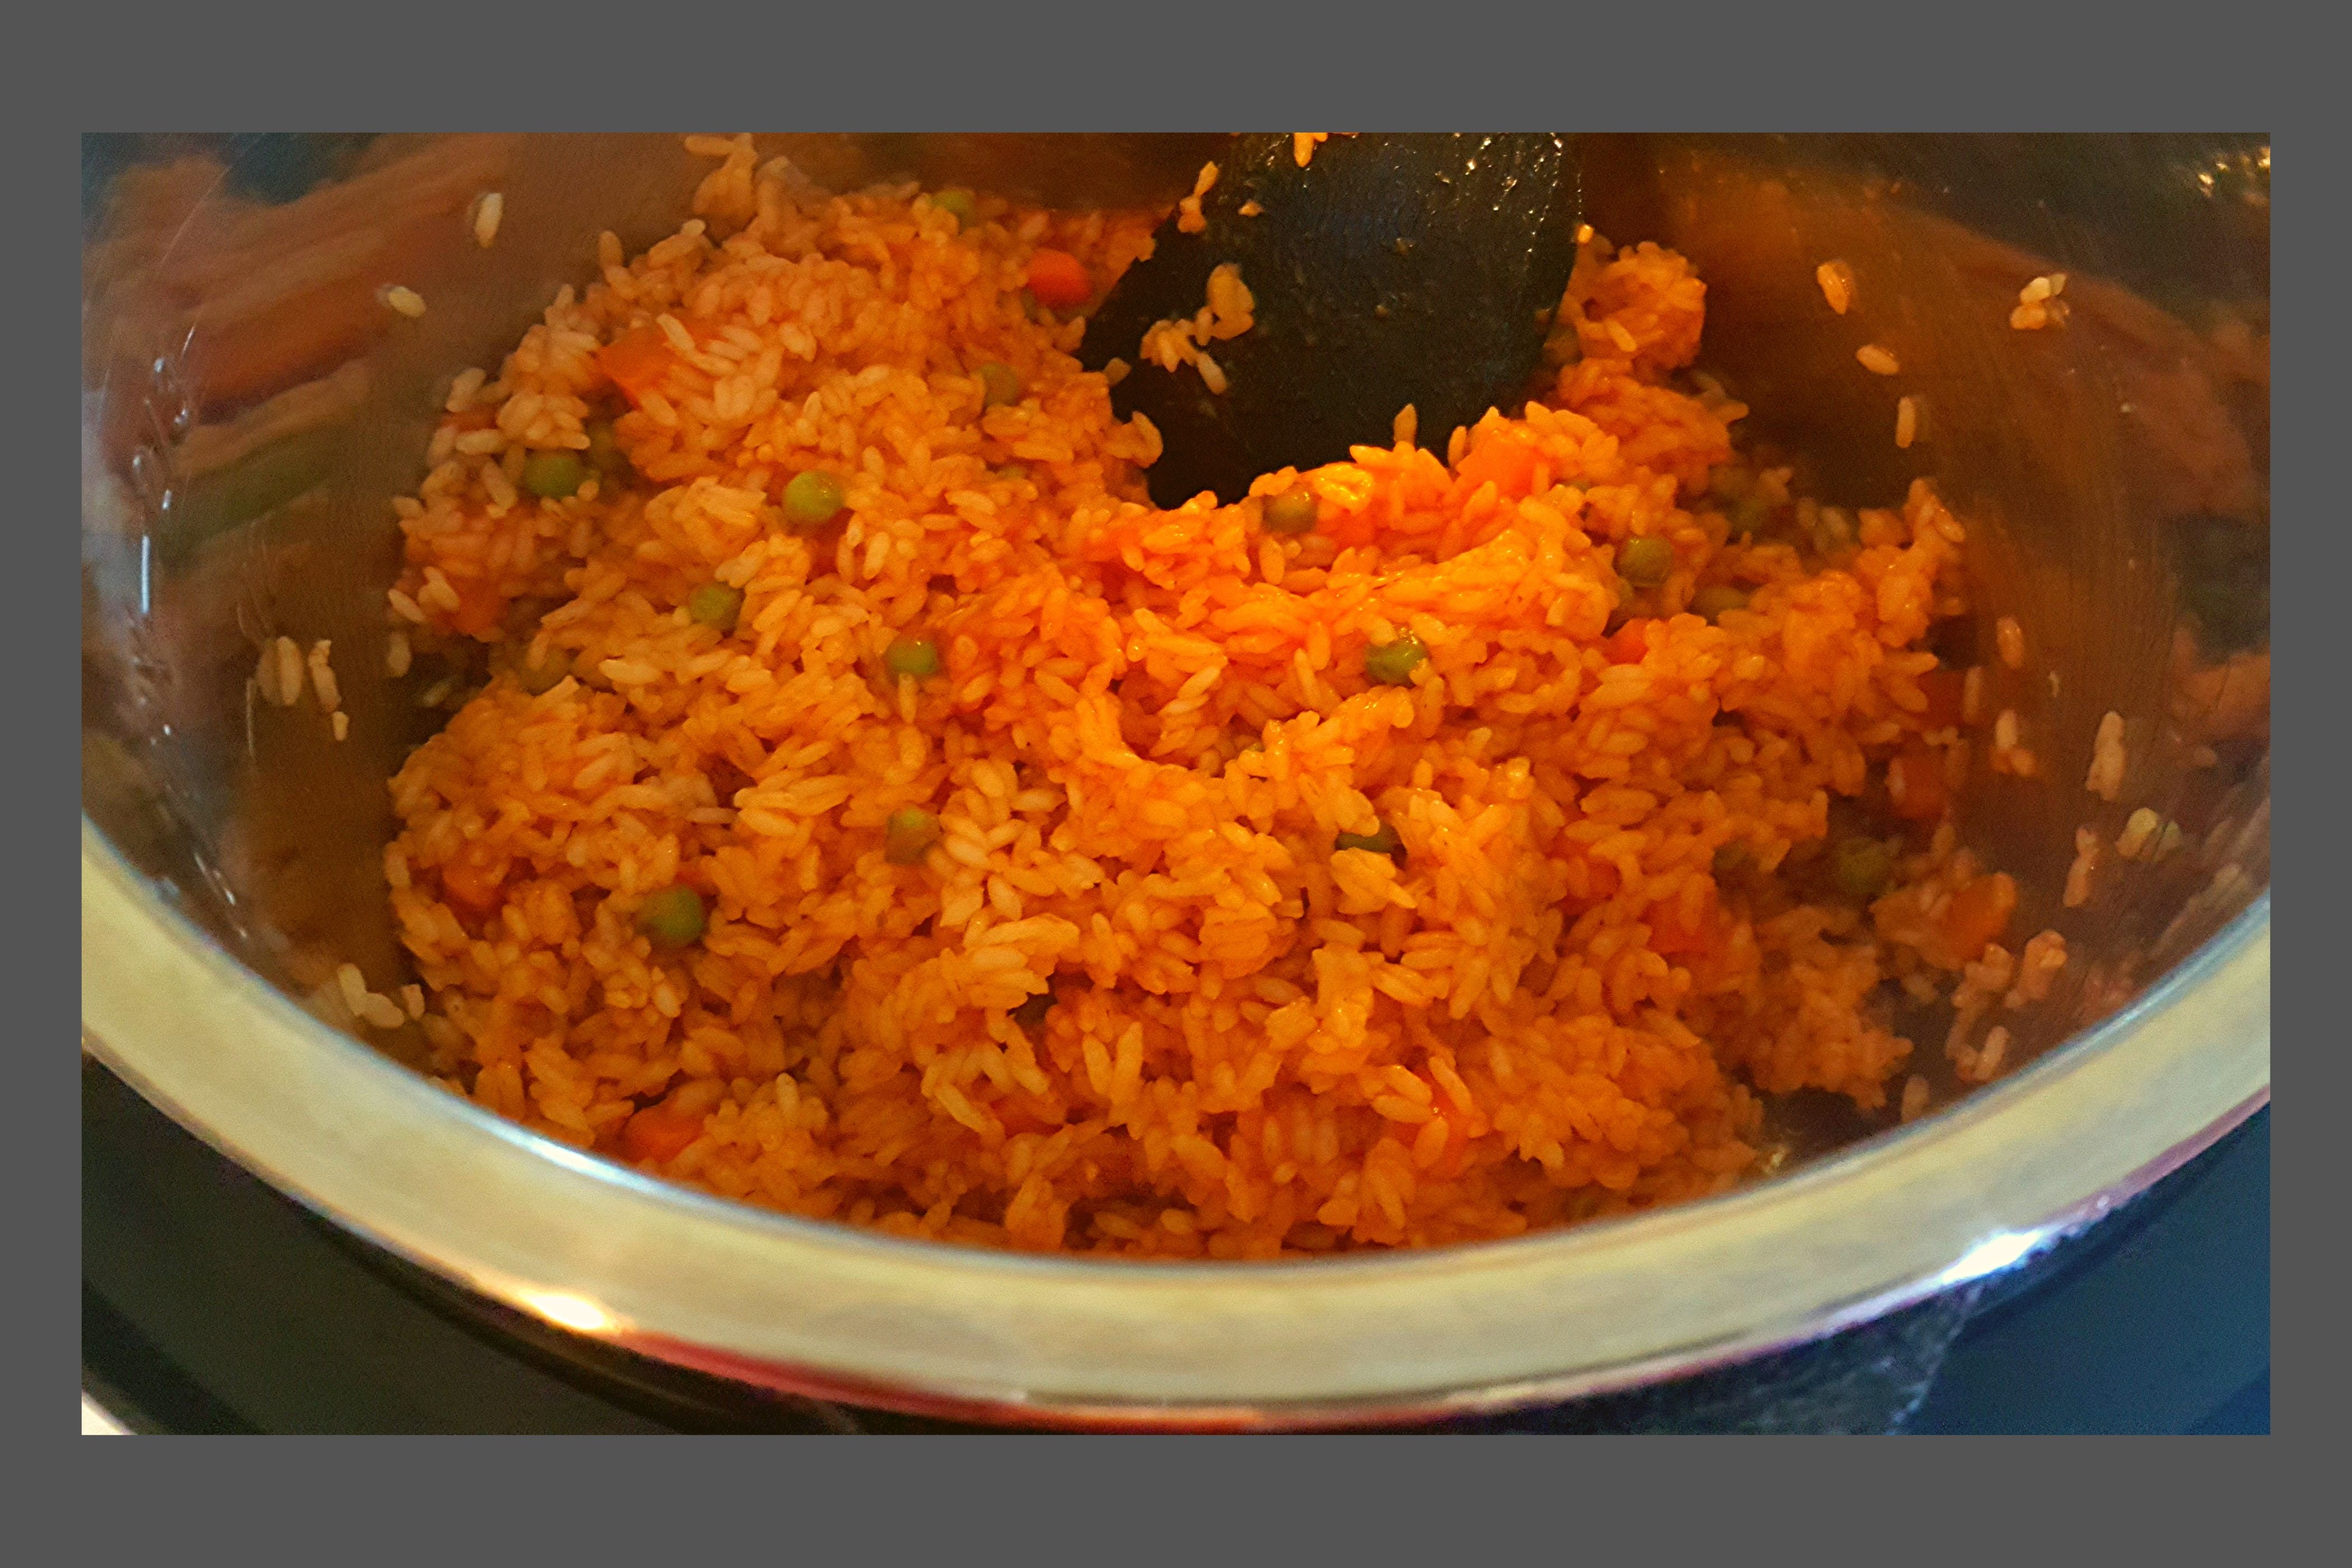 A silver Instant Pot filled with Mexican Rice with peas and carrots.